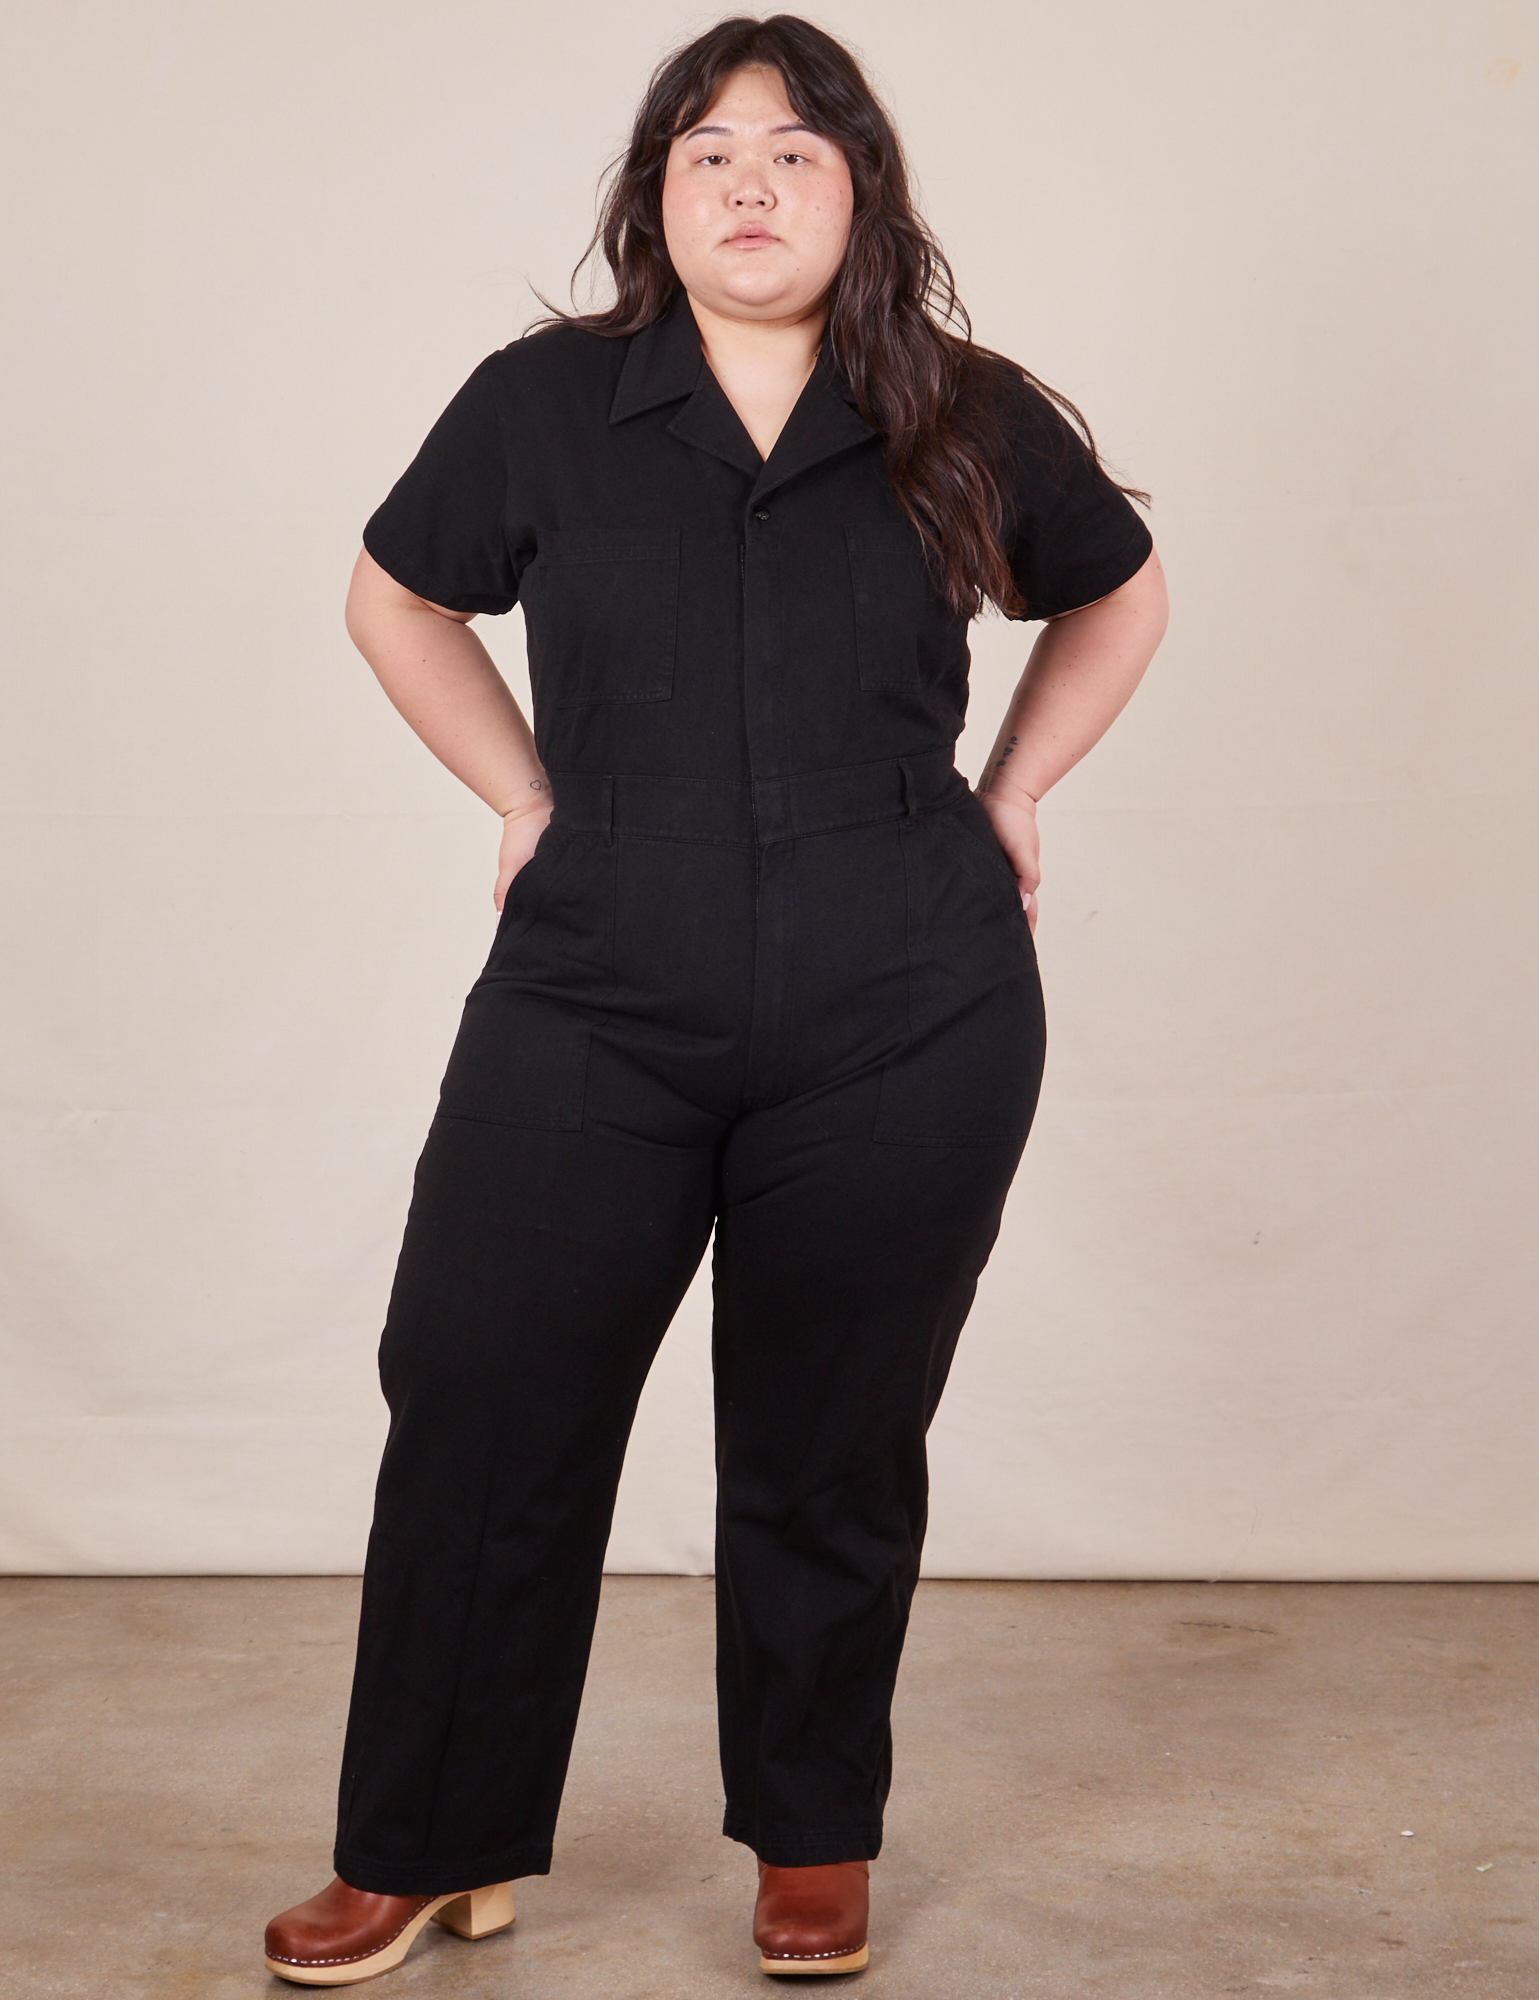 Ashley is 5&#39;7&quot; and wearing 1XL Short Sleeve Jumpsuit in Basic Black